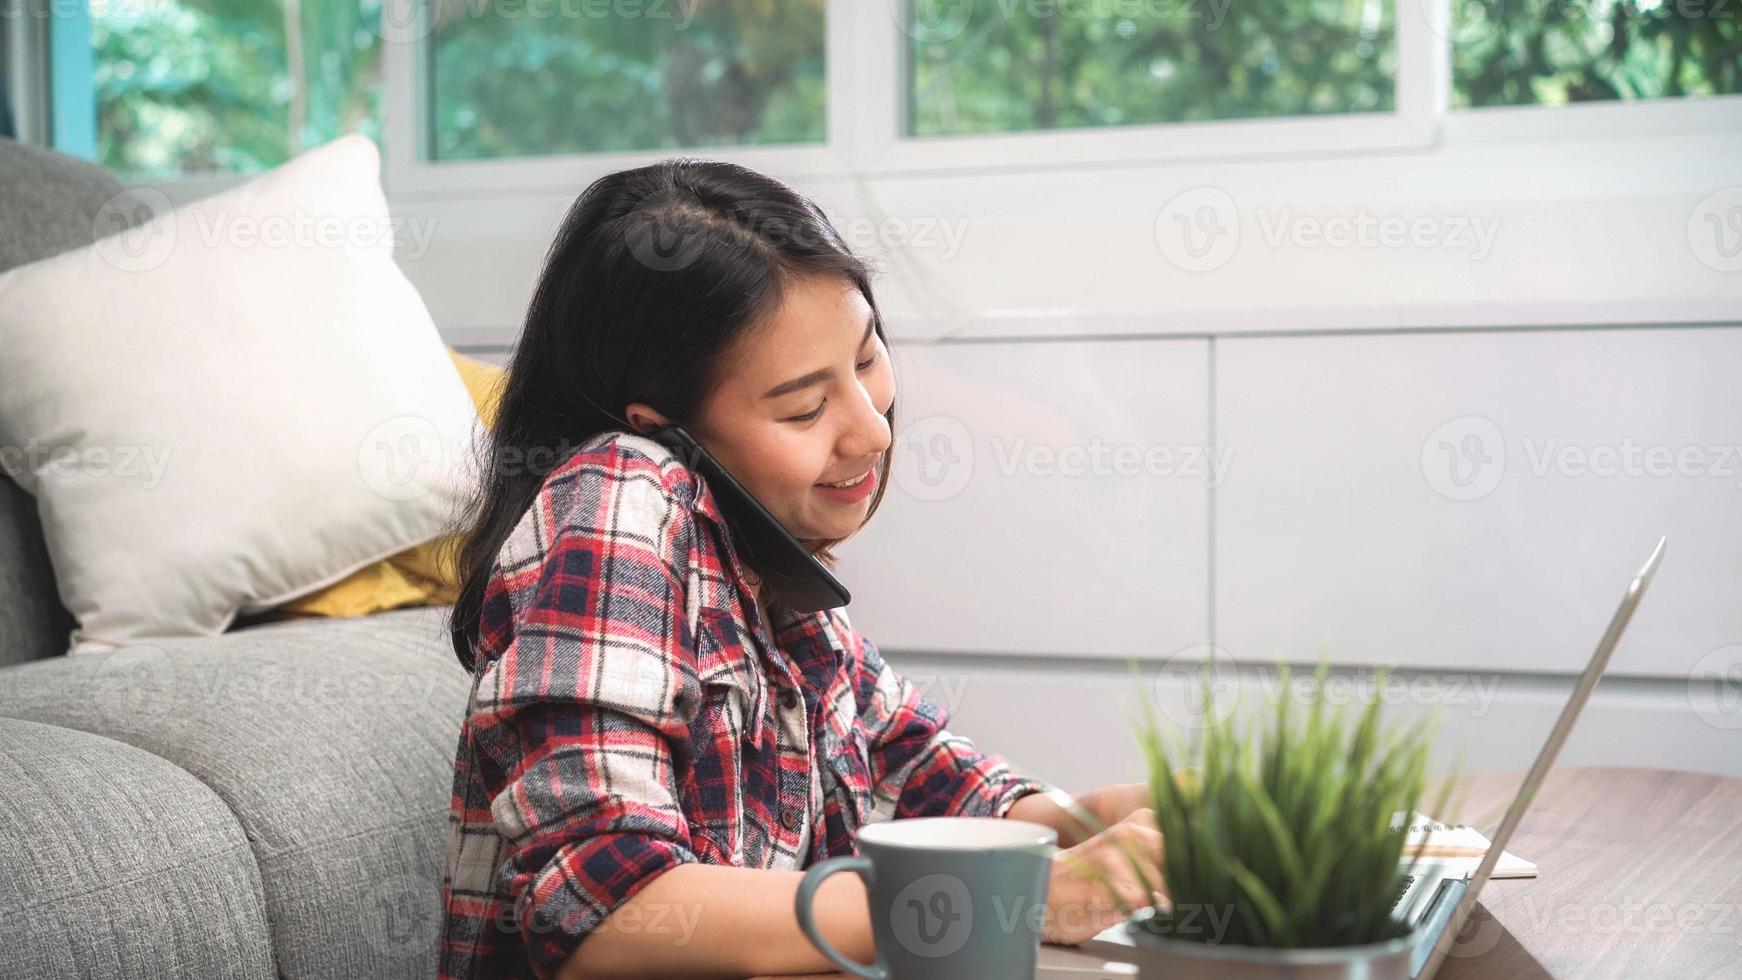 Freelance Asian woman working at home, business female working on laptop and using mobile phone talking with customer on sofa in living room at home. Lifestyle women working at home concept. photo